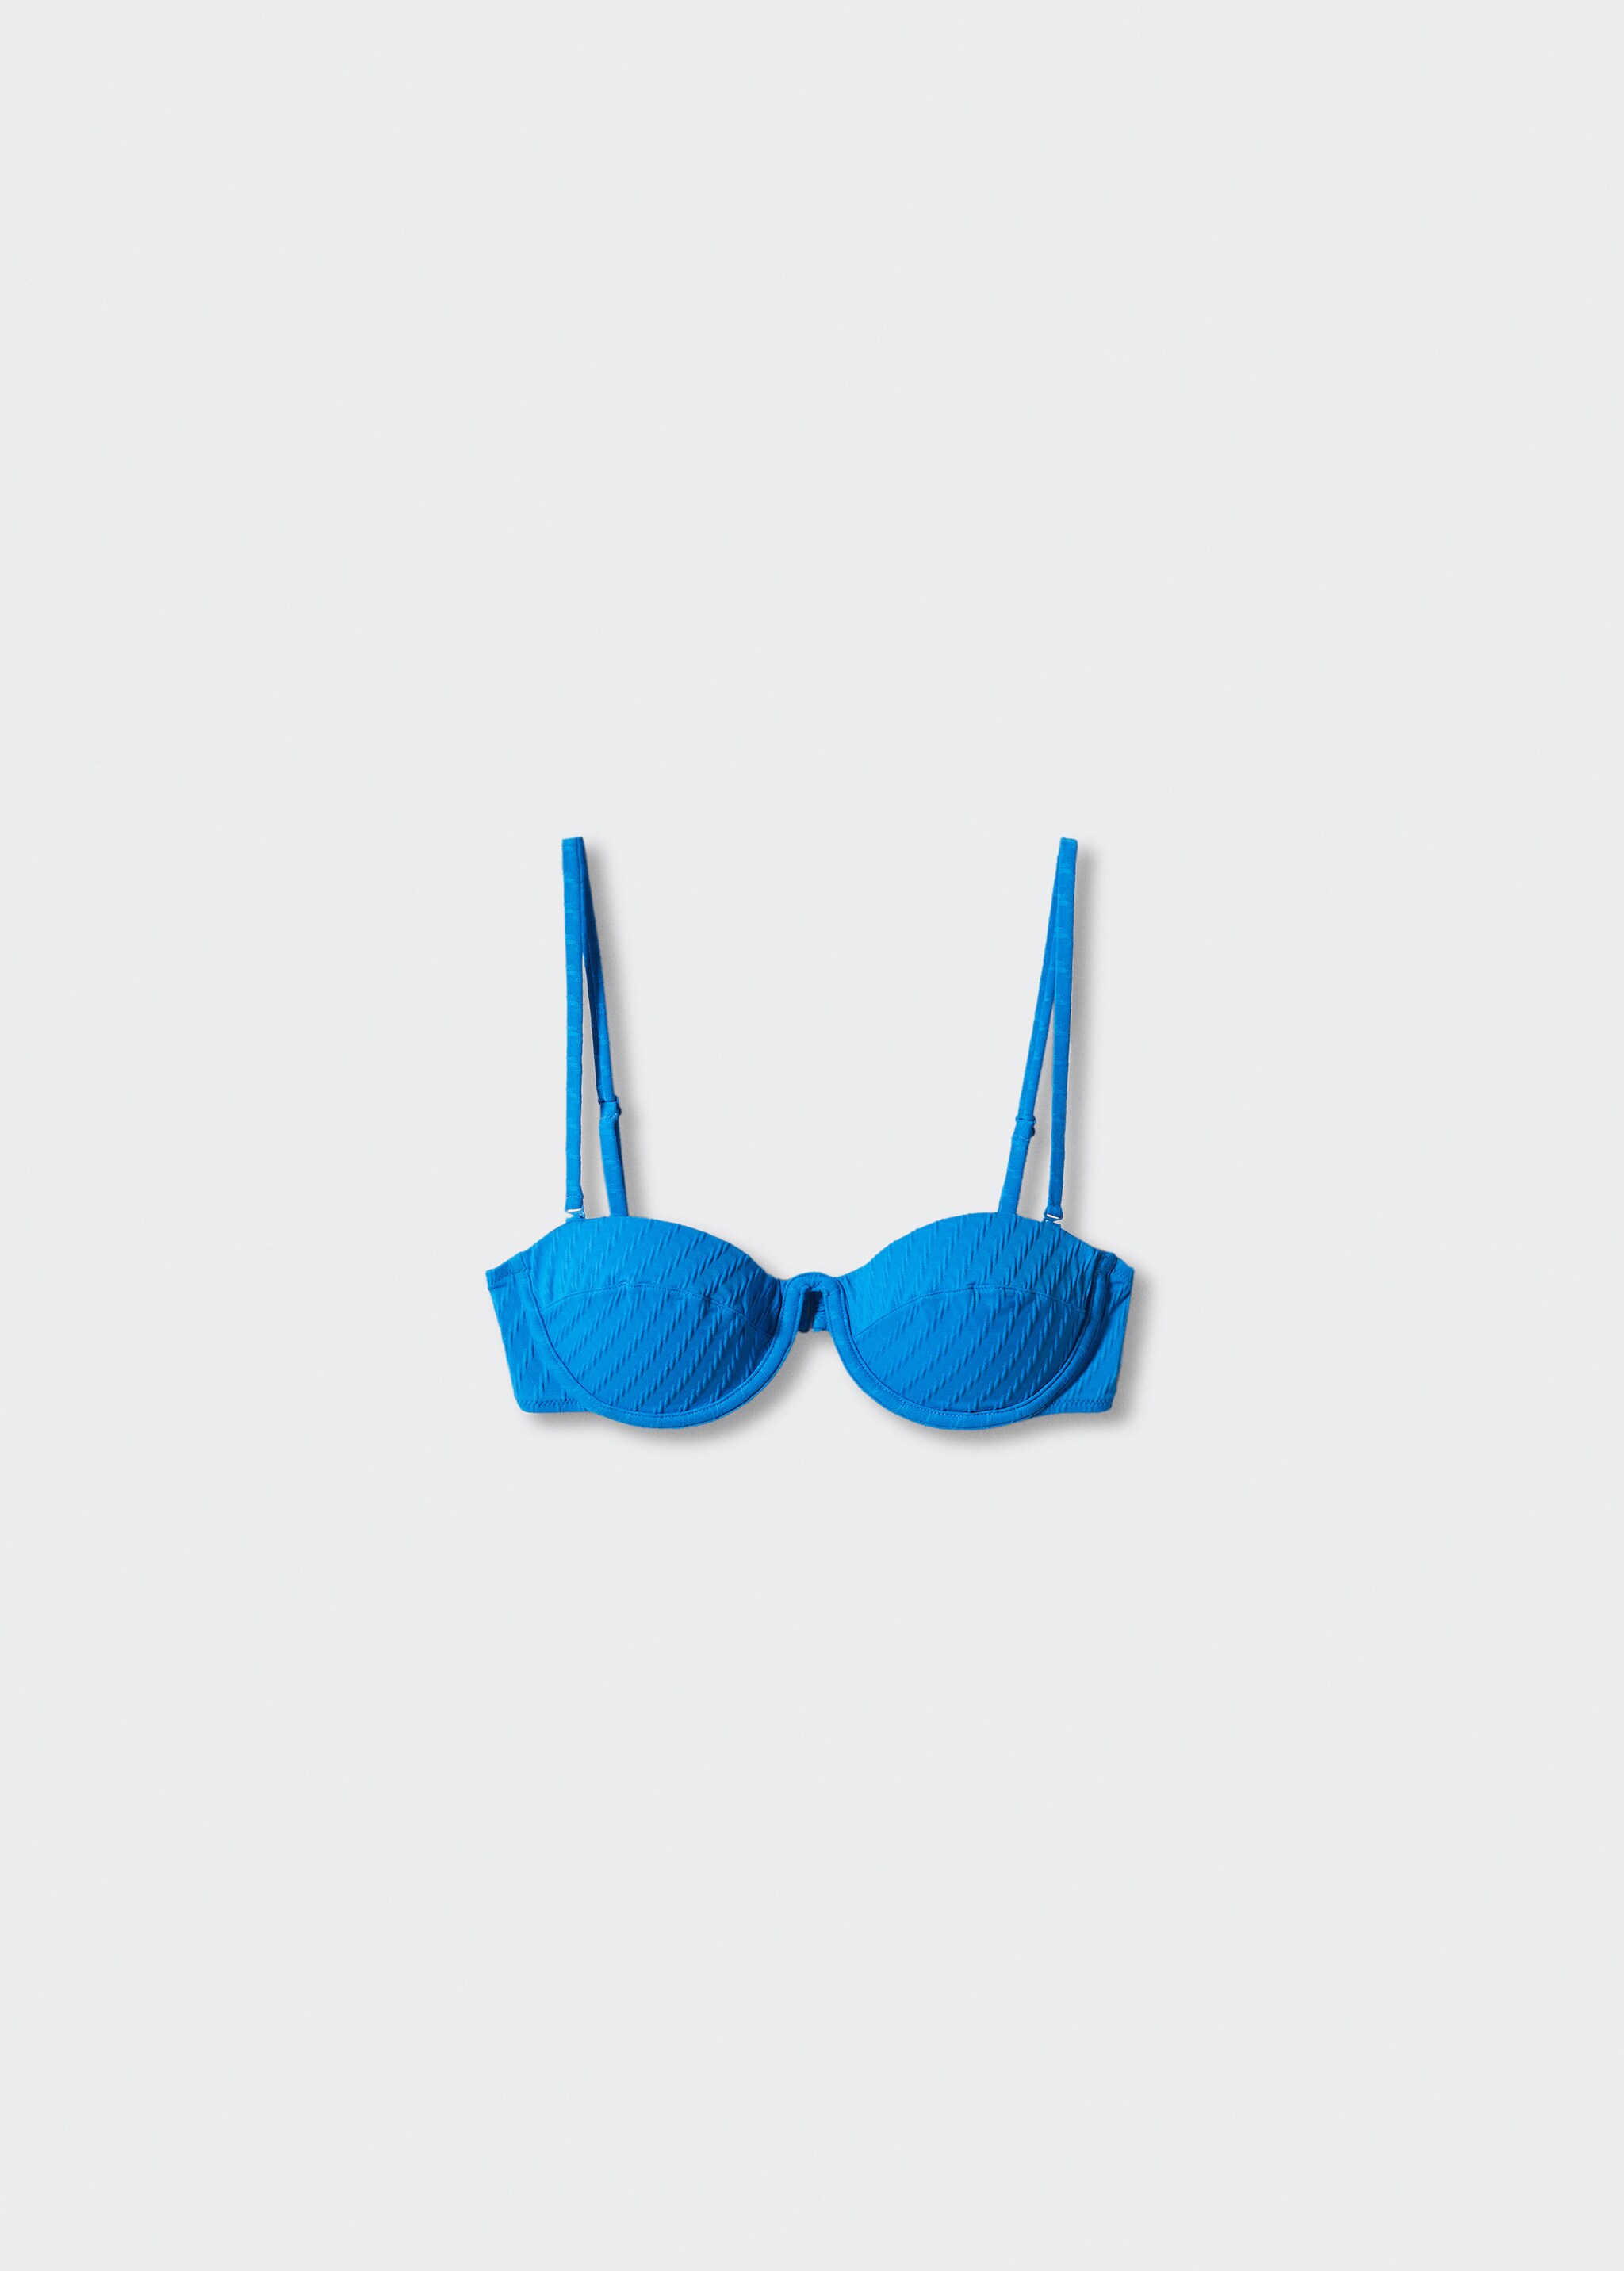 Underwired bikini top - Article without model